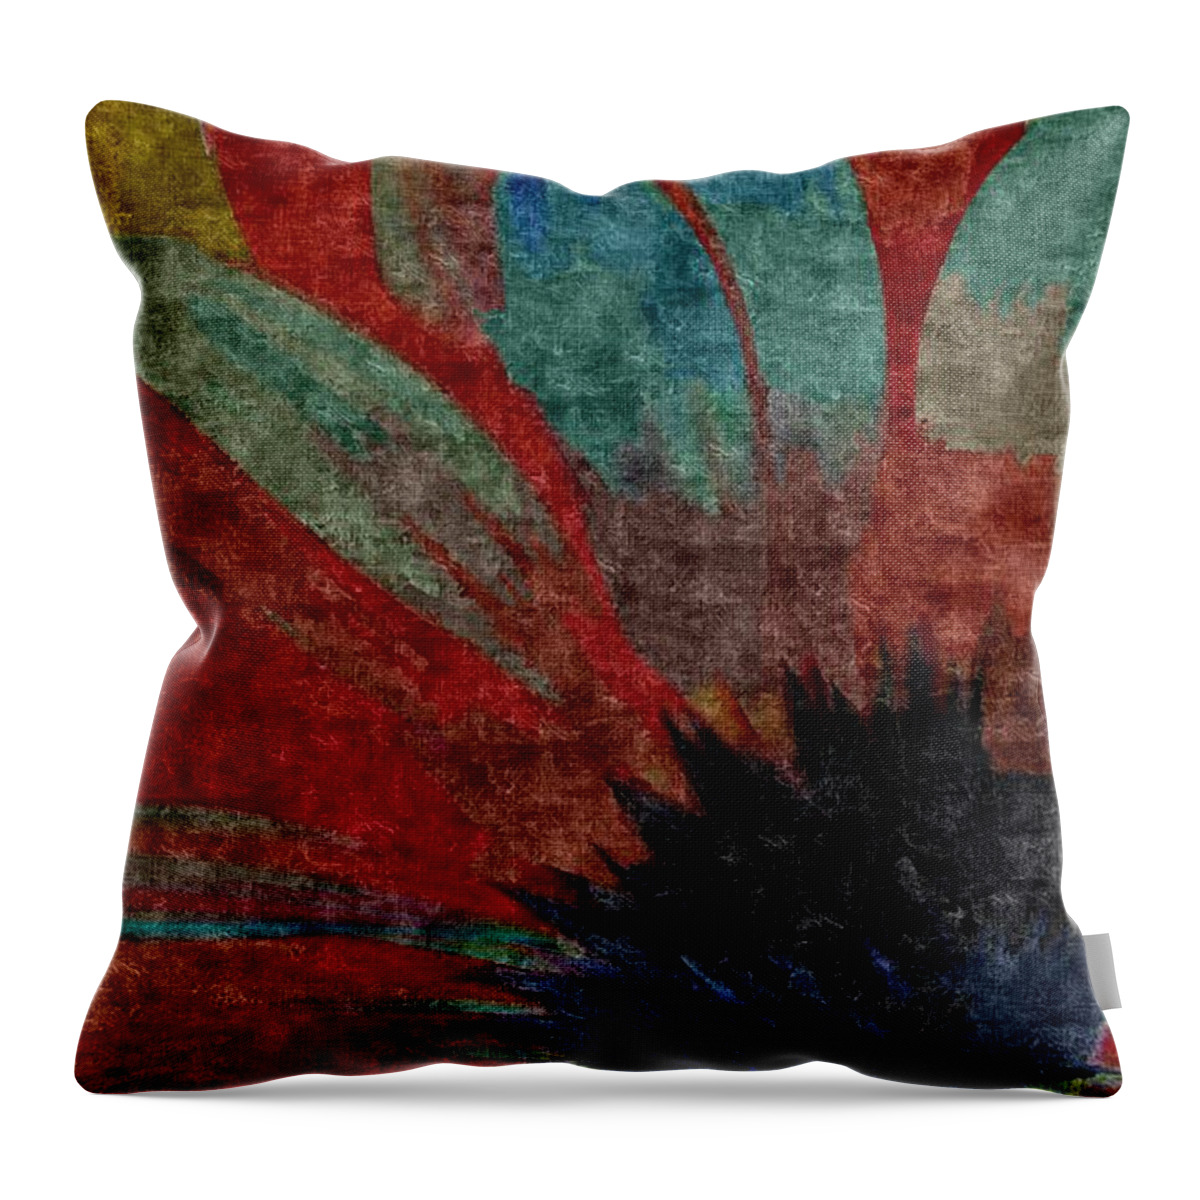 Daisy Throw Pillow featuring the mixed media Behind Daisy by Jacqueline McReynolds